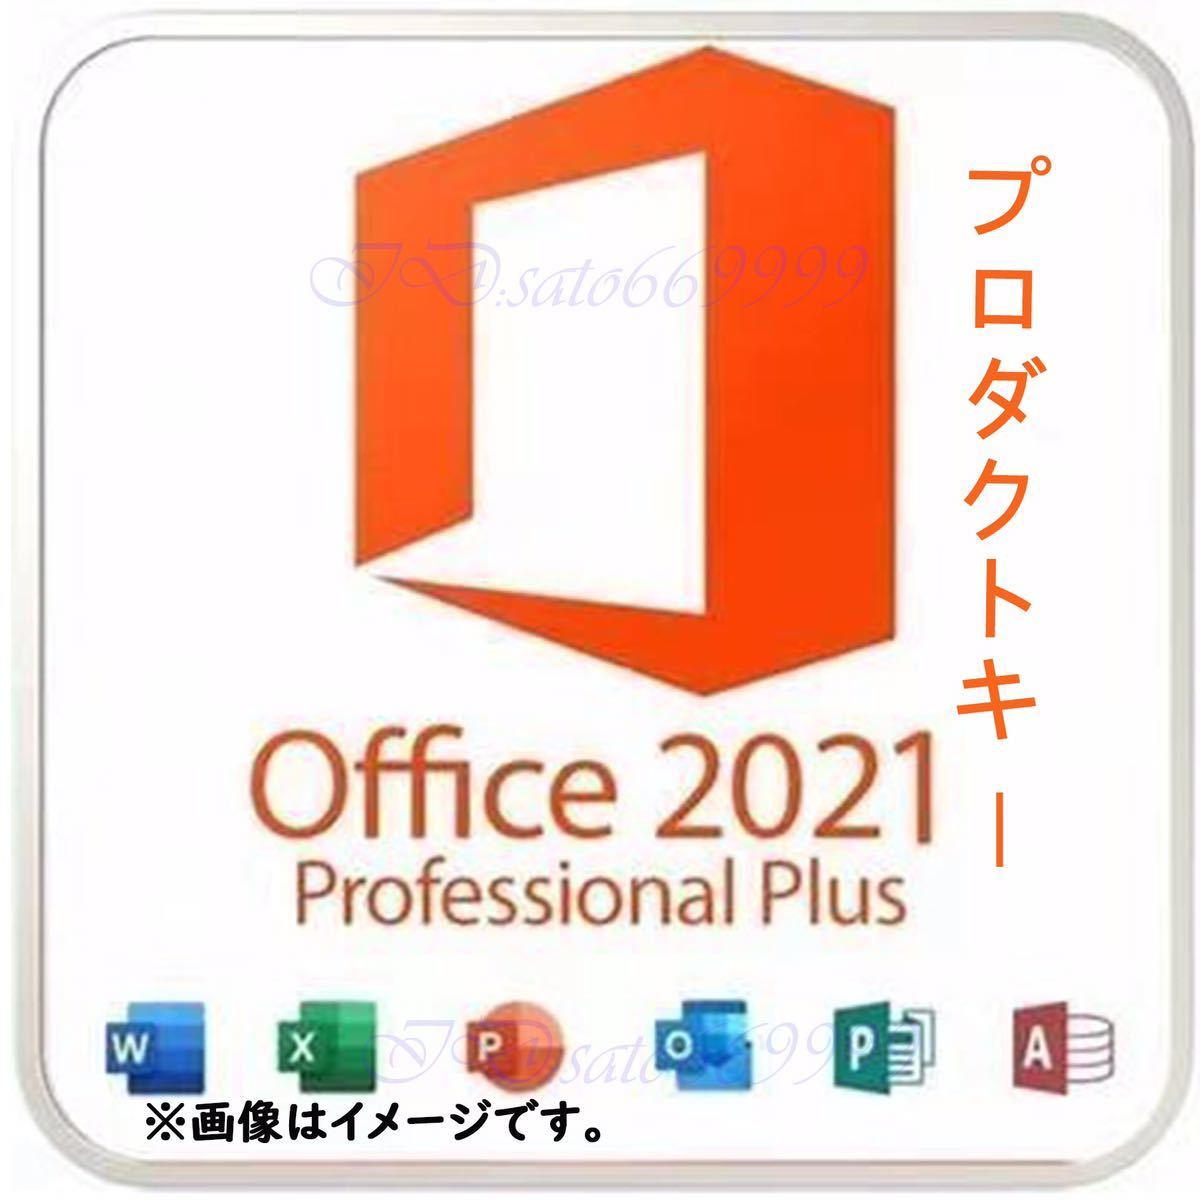 Microsoft Office2021 Professional Plusプロダクトキー日本語 正規認証保証Word Excel PowerPoint Access 安心サポート付き 水の画像1